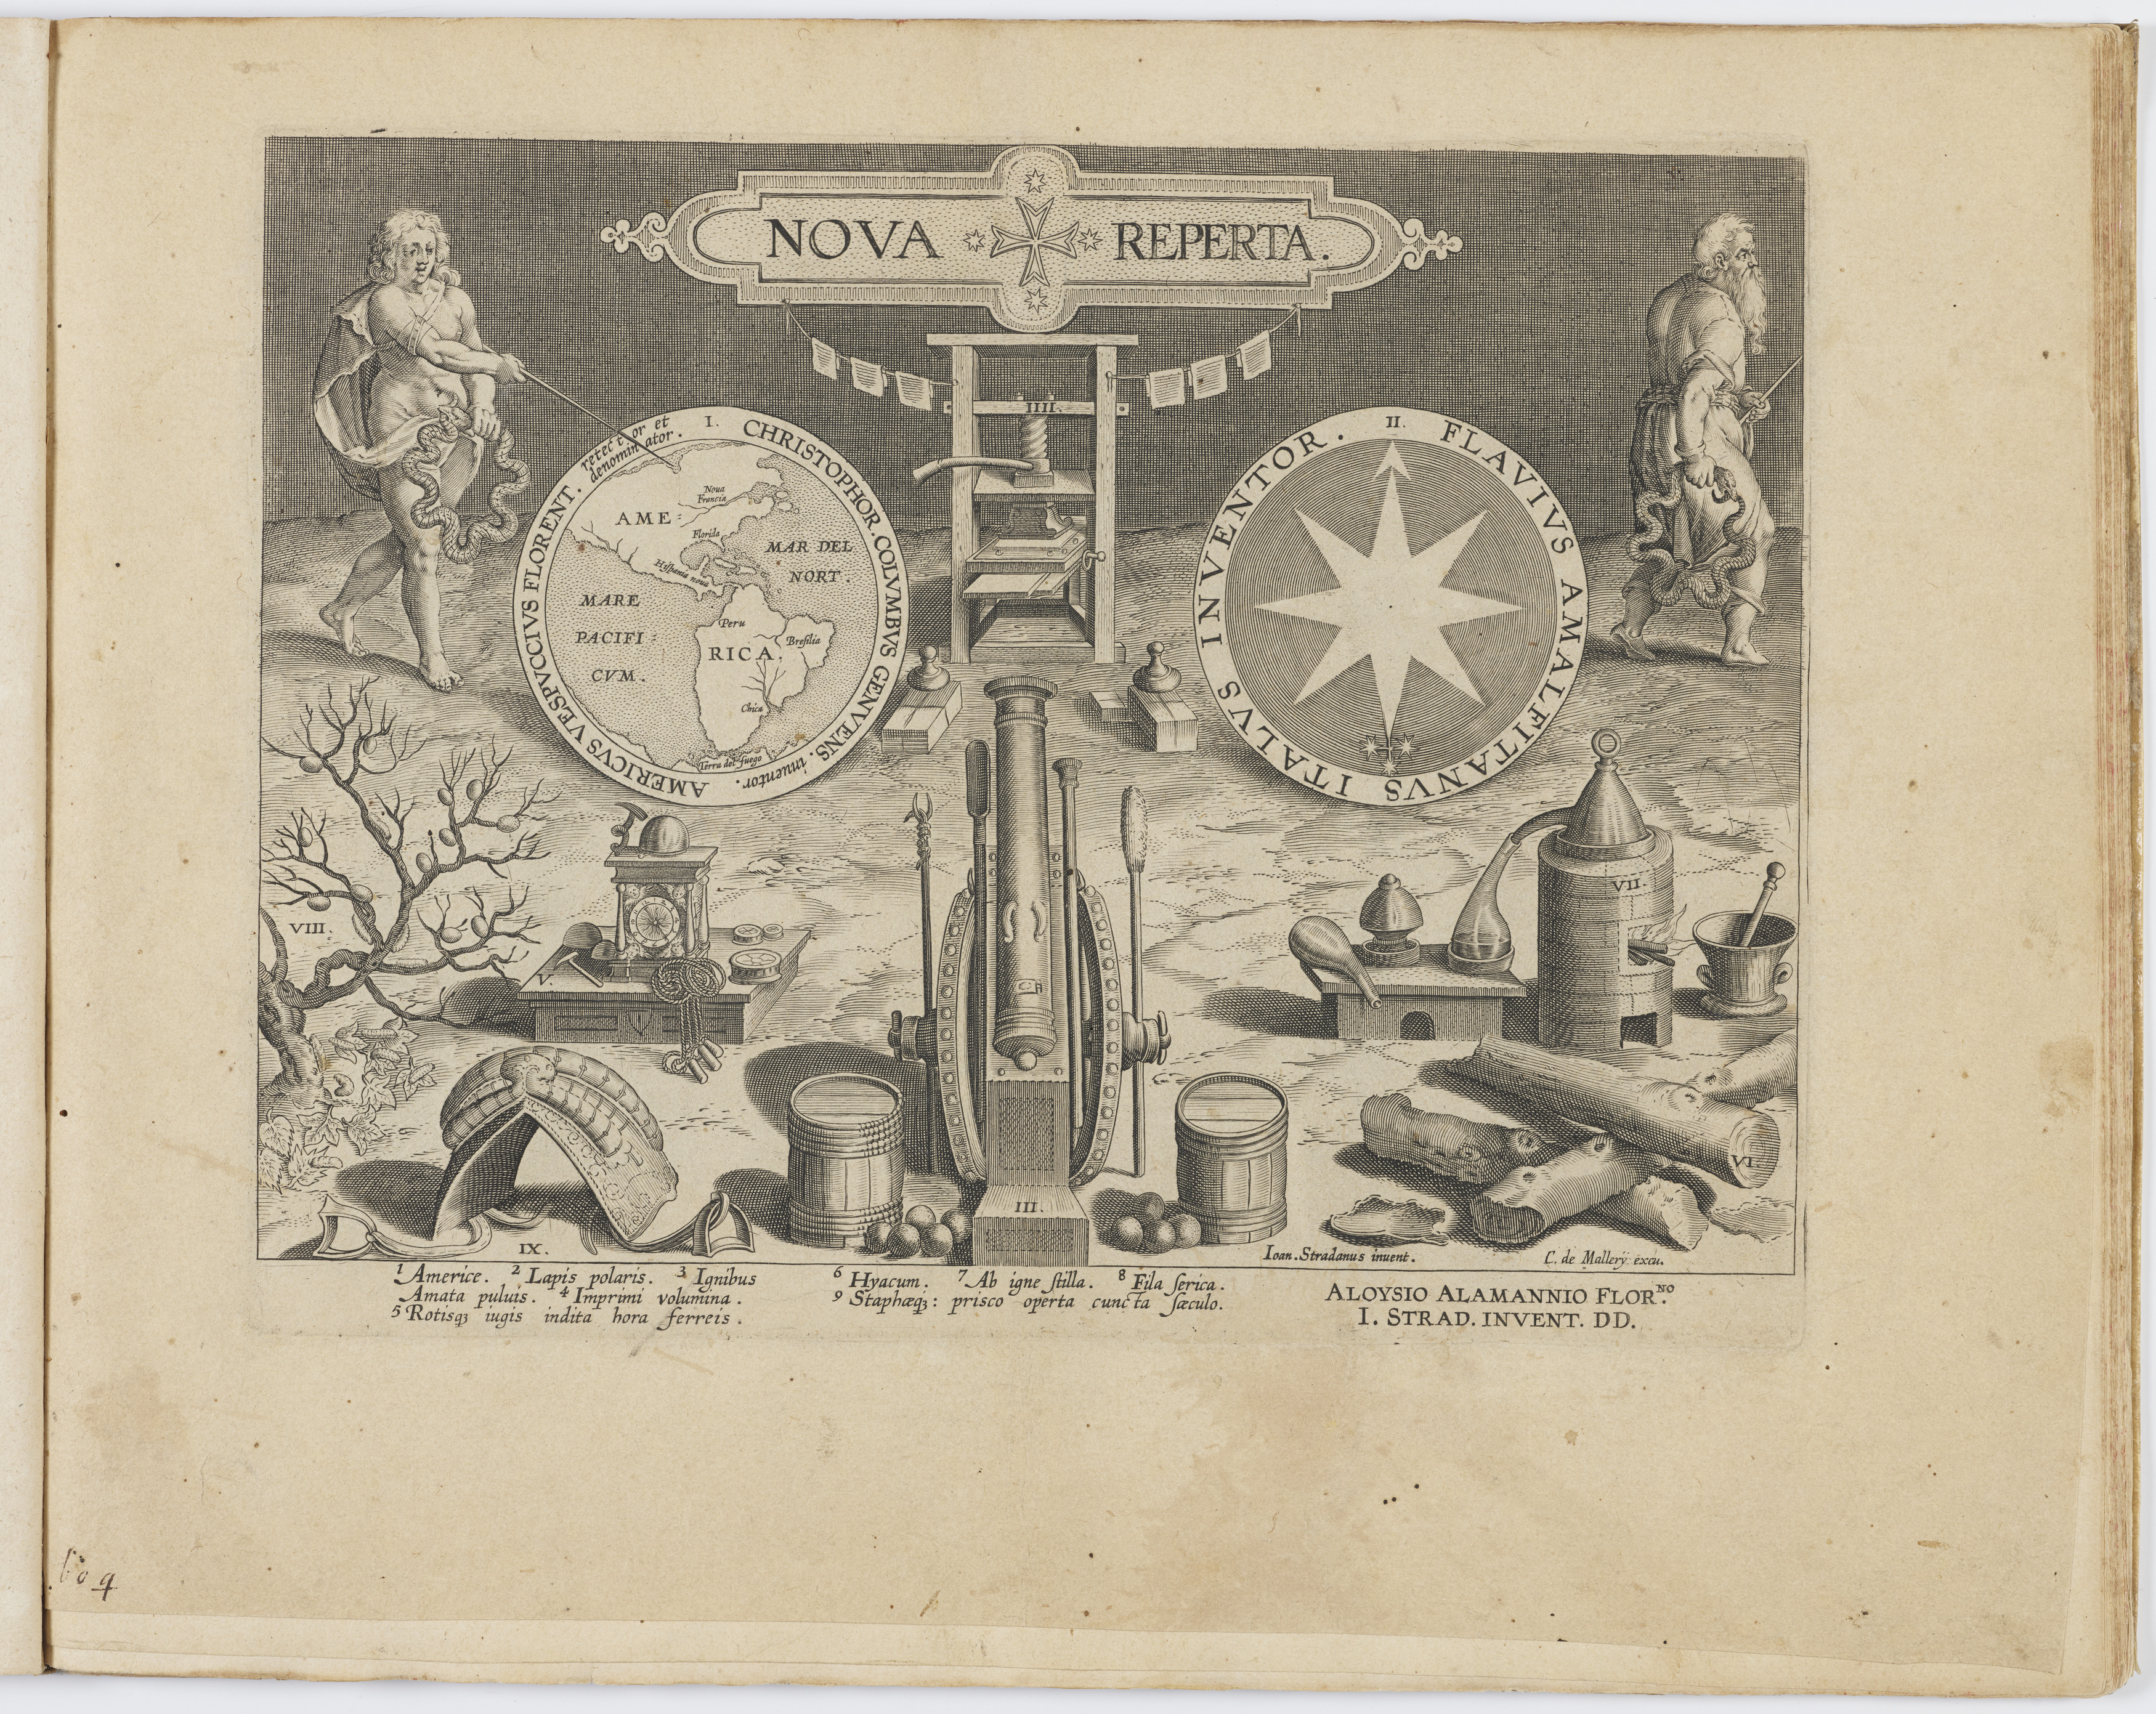 Black and white title page with depictions of several inventions.